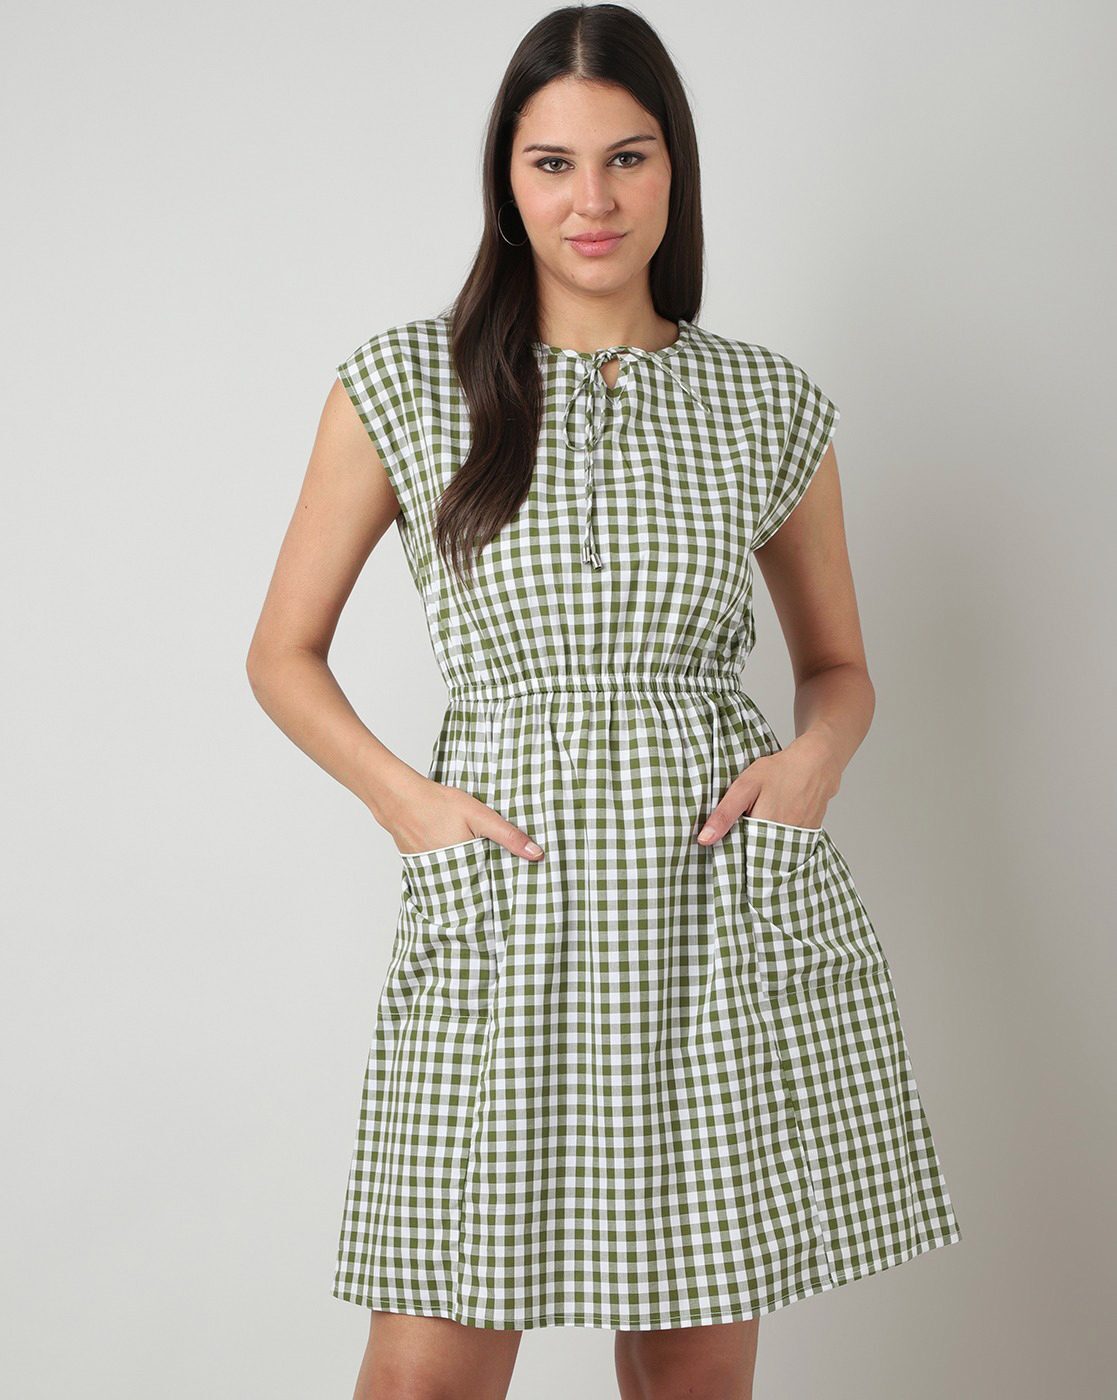 Buy Green White Gingham Online In India -  India